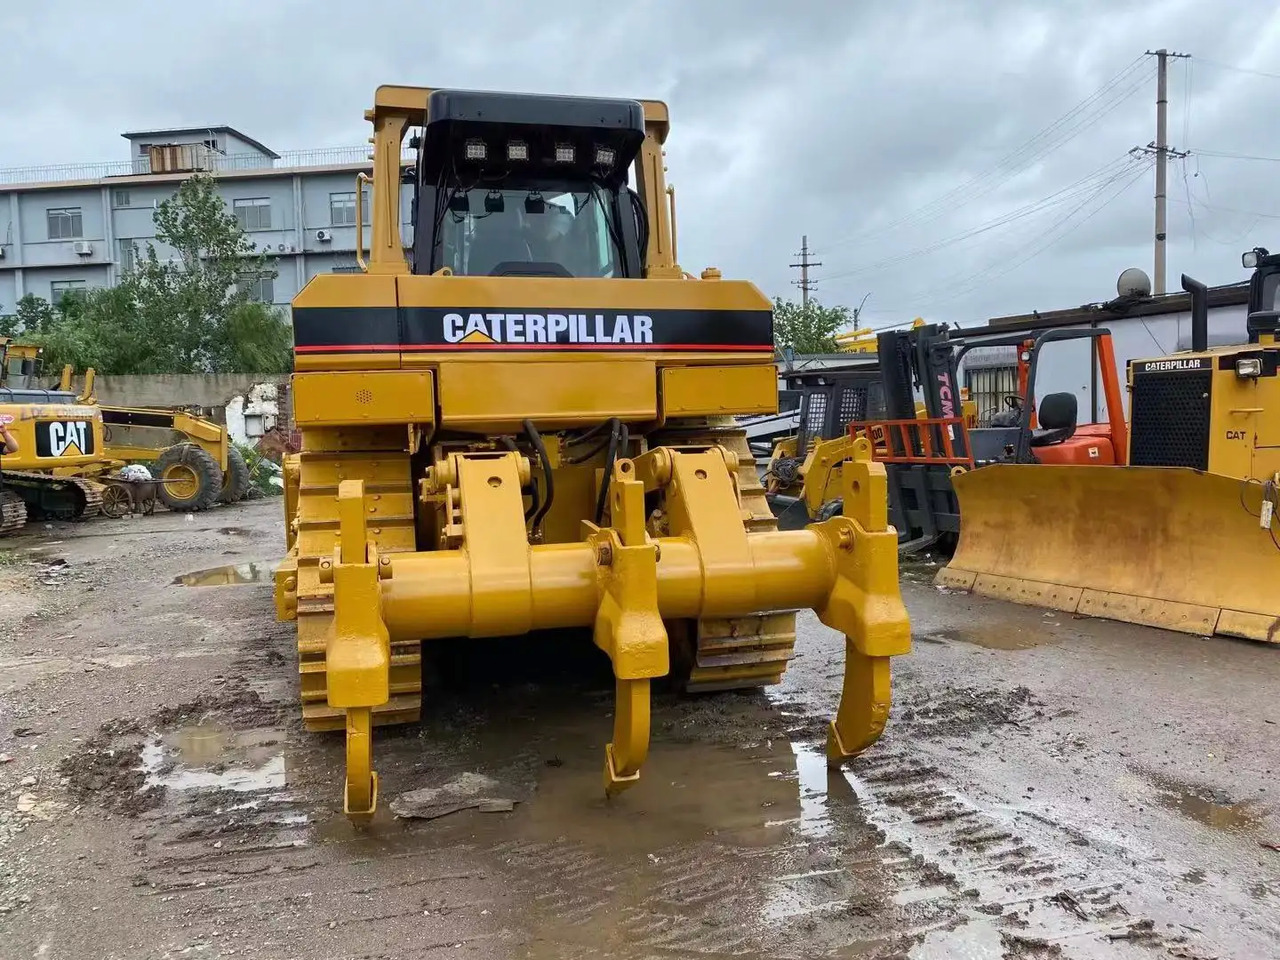 Used cat d8r bulldozer D8R D9R D6R D7R caterpillar used d7g d6g bulldozer cheap price for sale - Bulldozer: picture 2